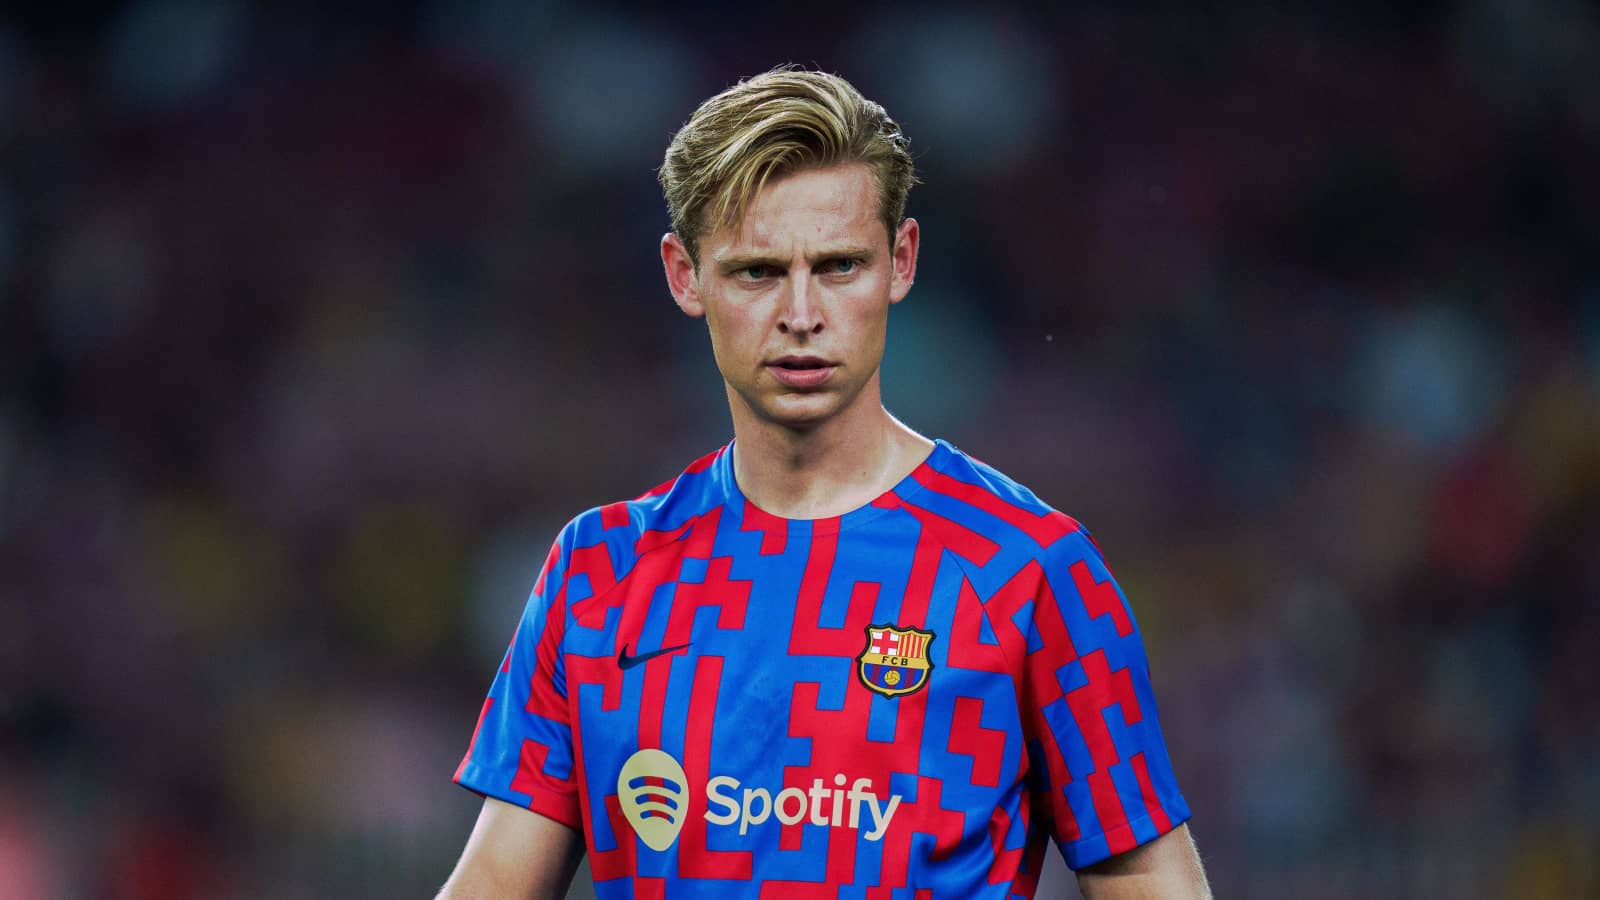 Manchester United set to make final push to sign Frenkie de Jong from Barcelona